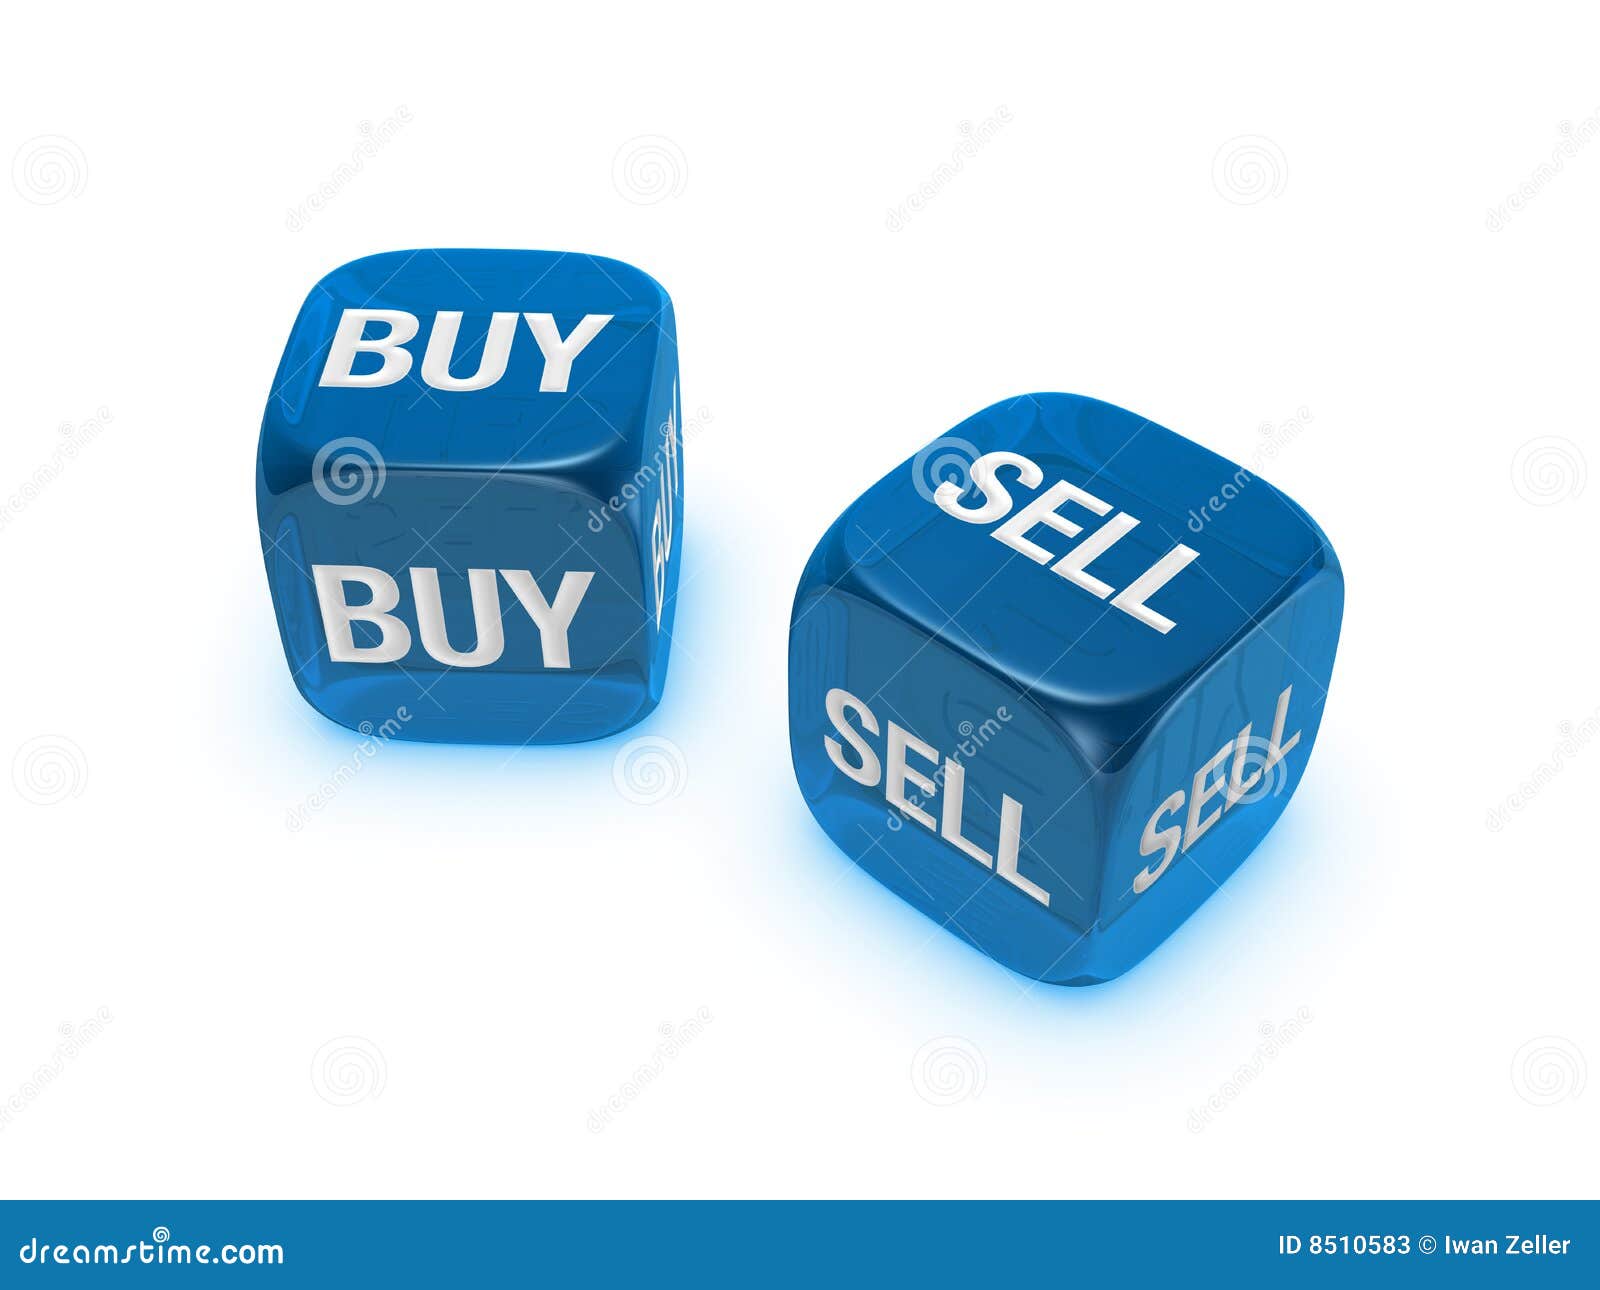 pair of translucent blue dice with buy, sell sign